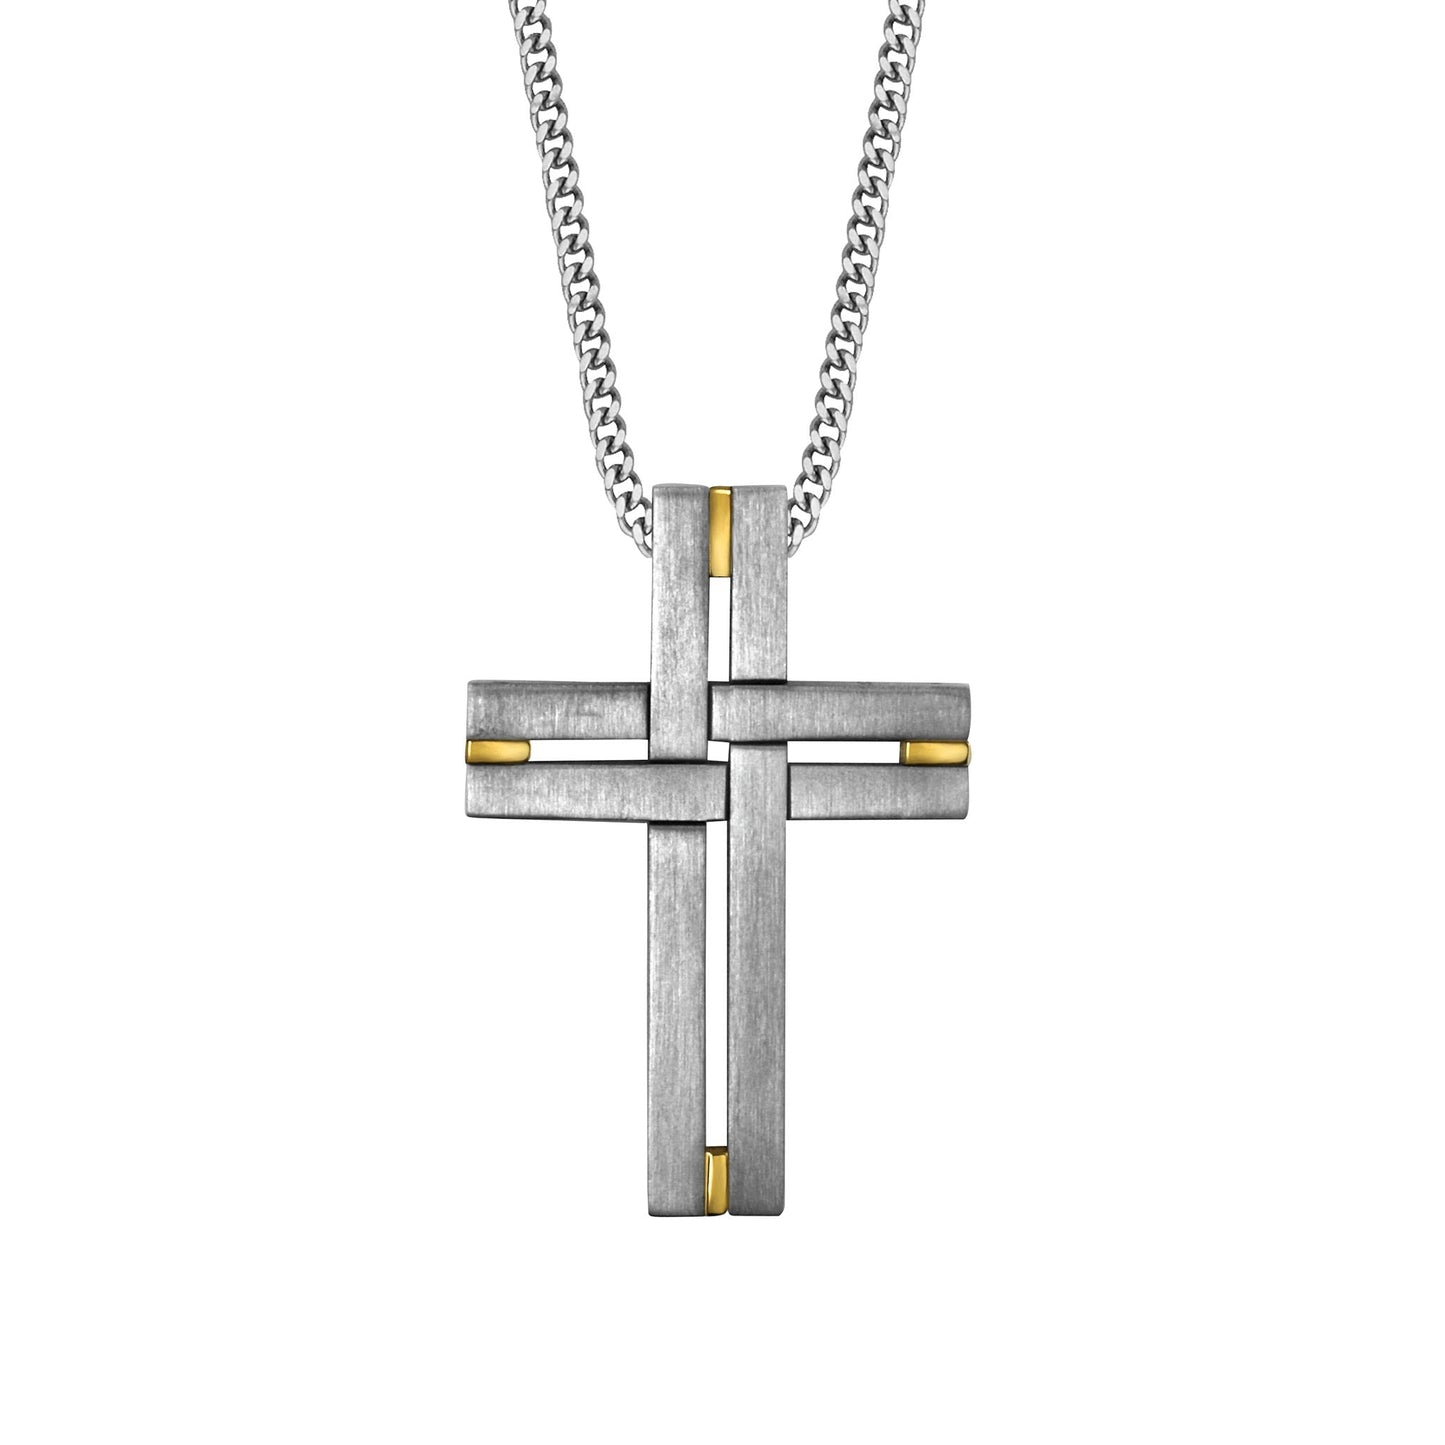 A stainless steel men's cross necklace on 24" chain displayed on a neutral white background.